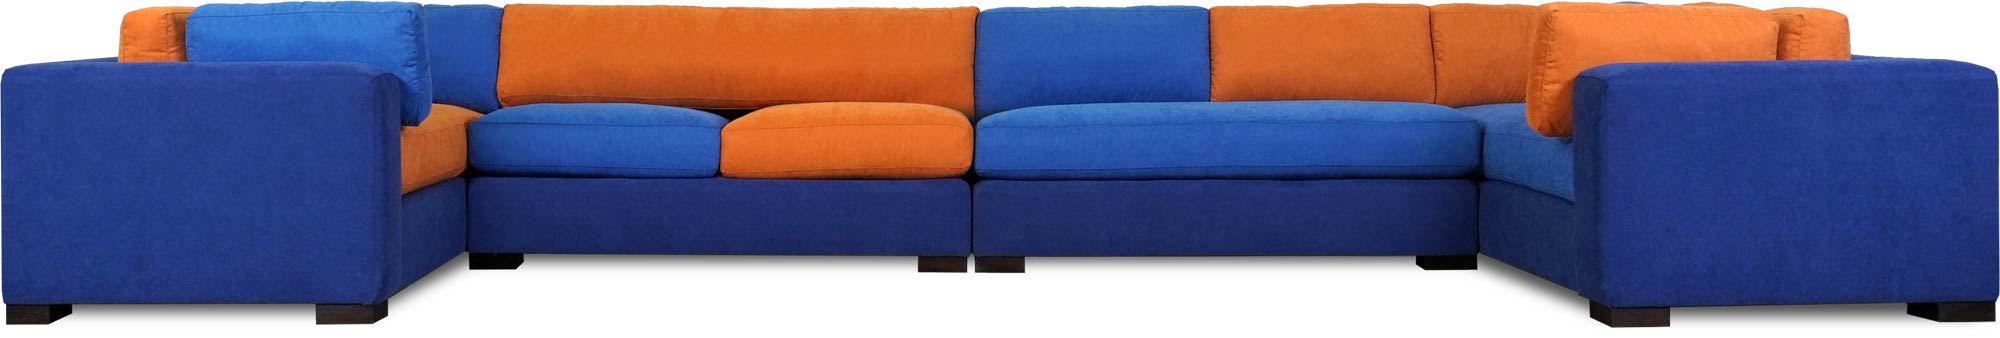 Chad sectional sofa in Fulton Lapis stain-proof blue fabric